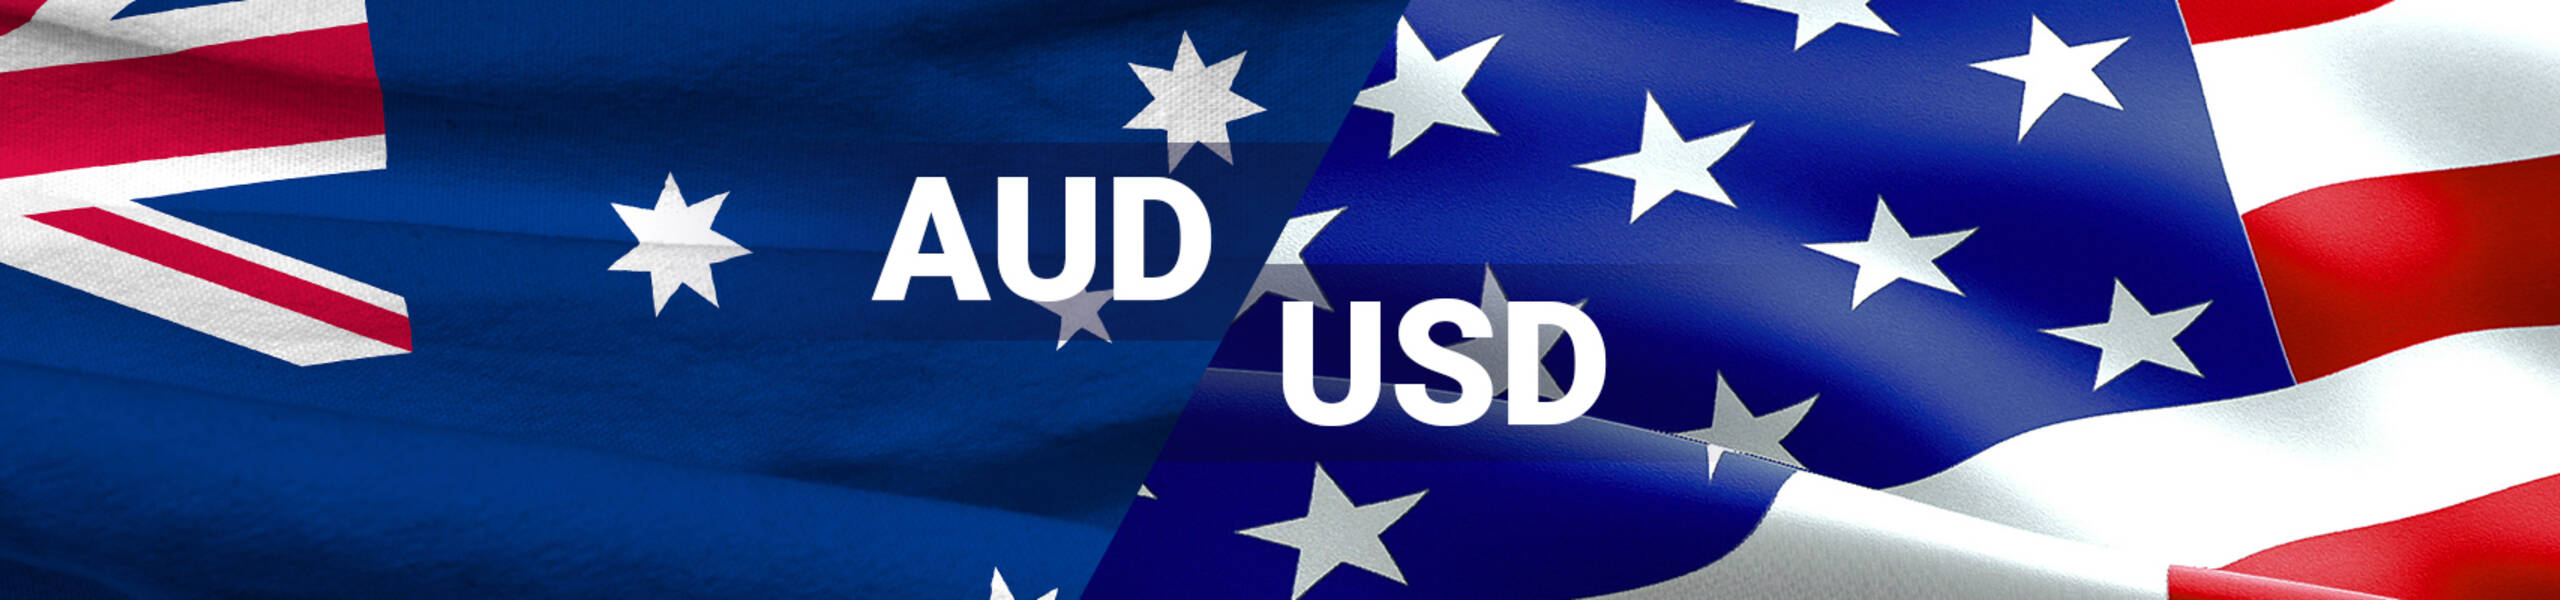 AUD/USD approaches a possible buy zone between 0.7500 and 0.7460